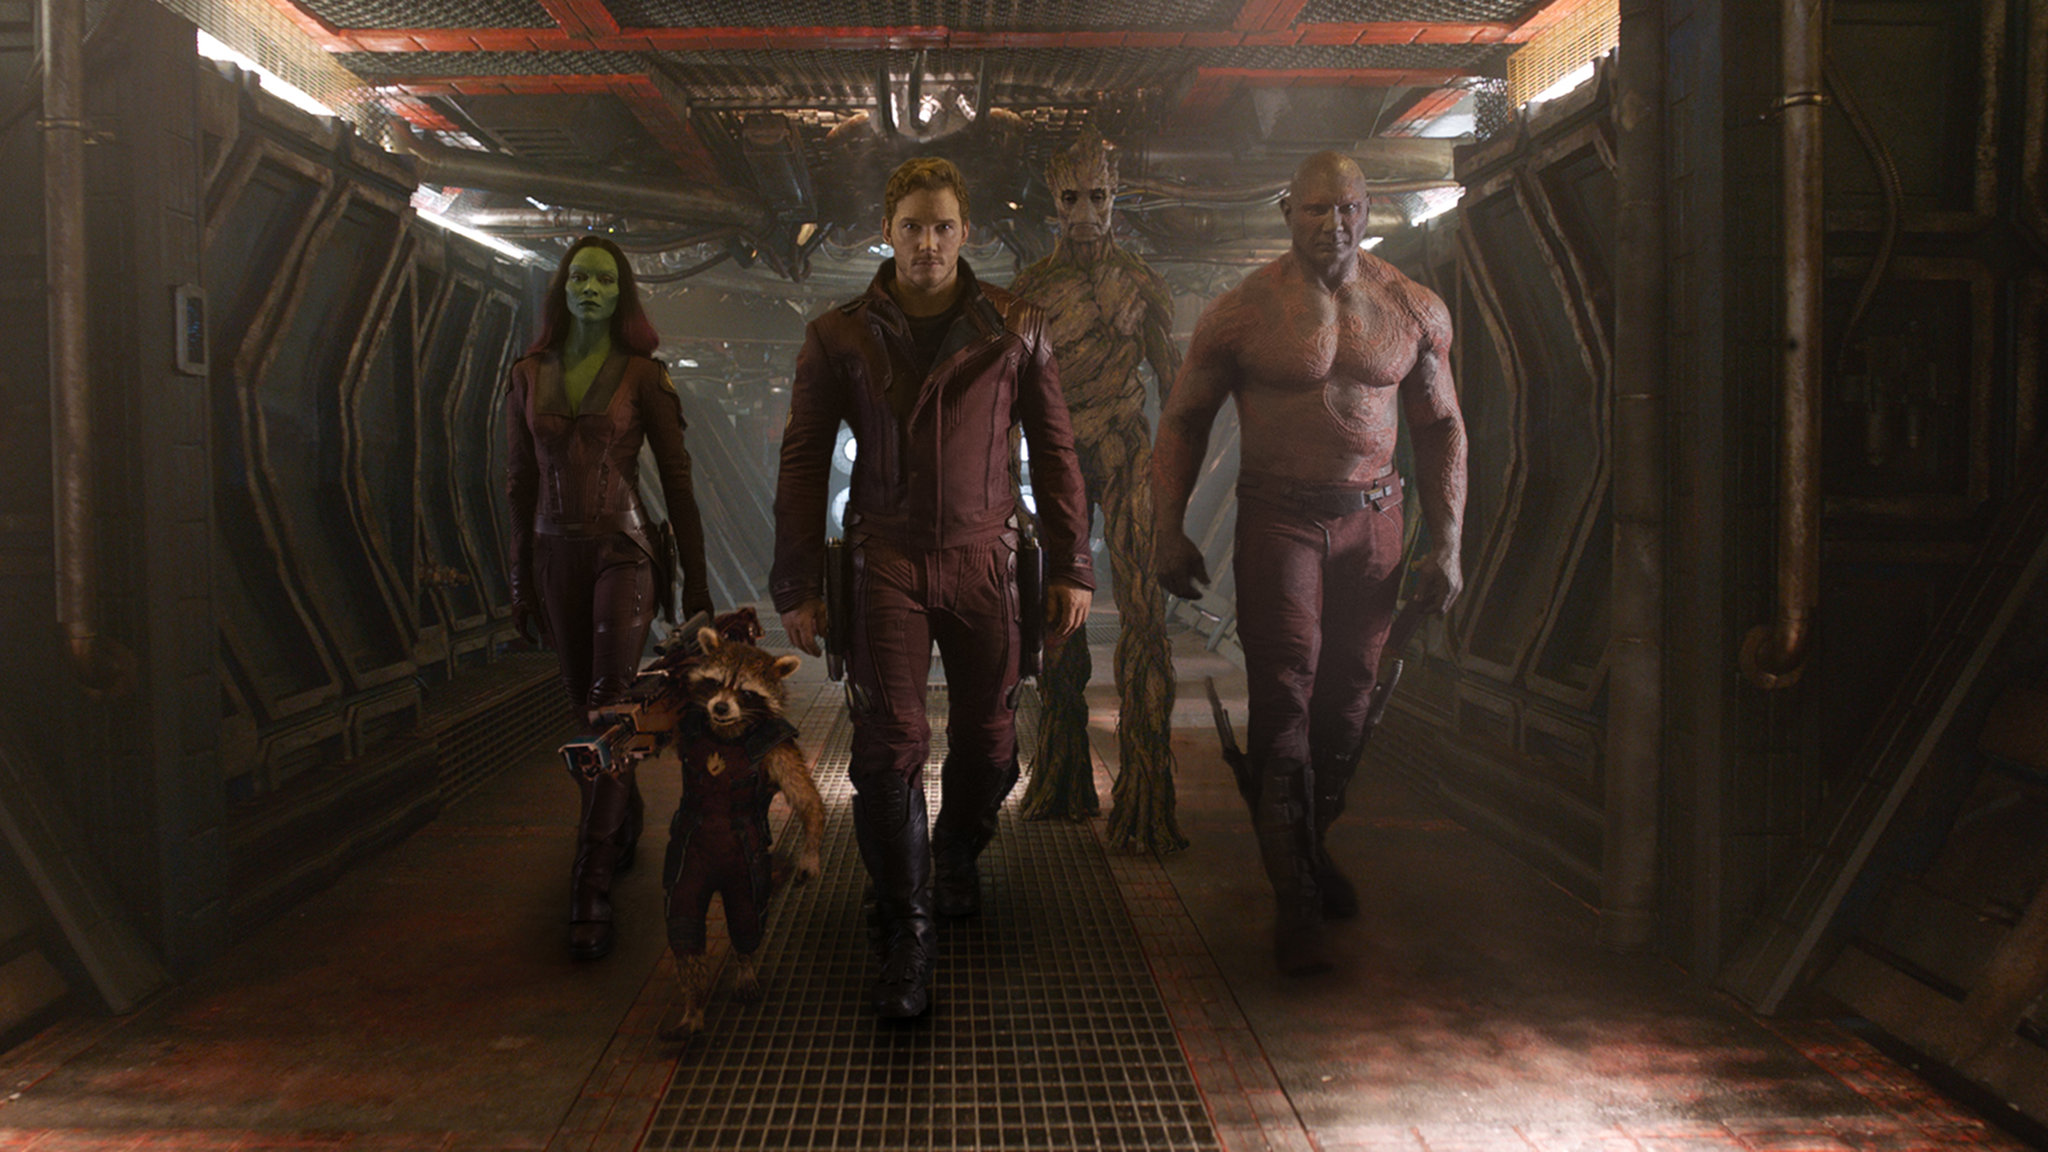 Guardians of the Galaxy (2014) Movie Story Summary & Review